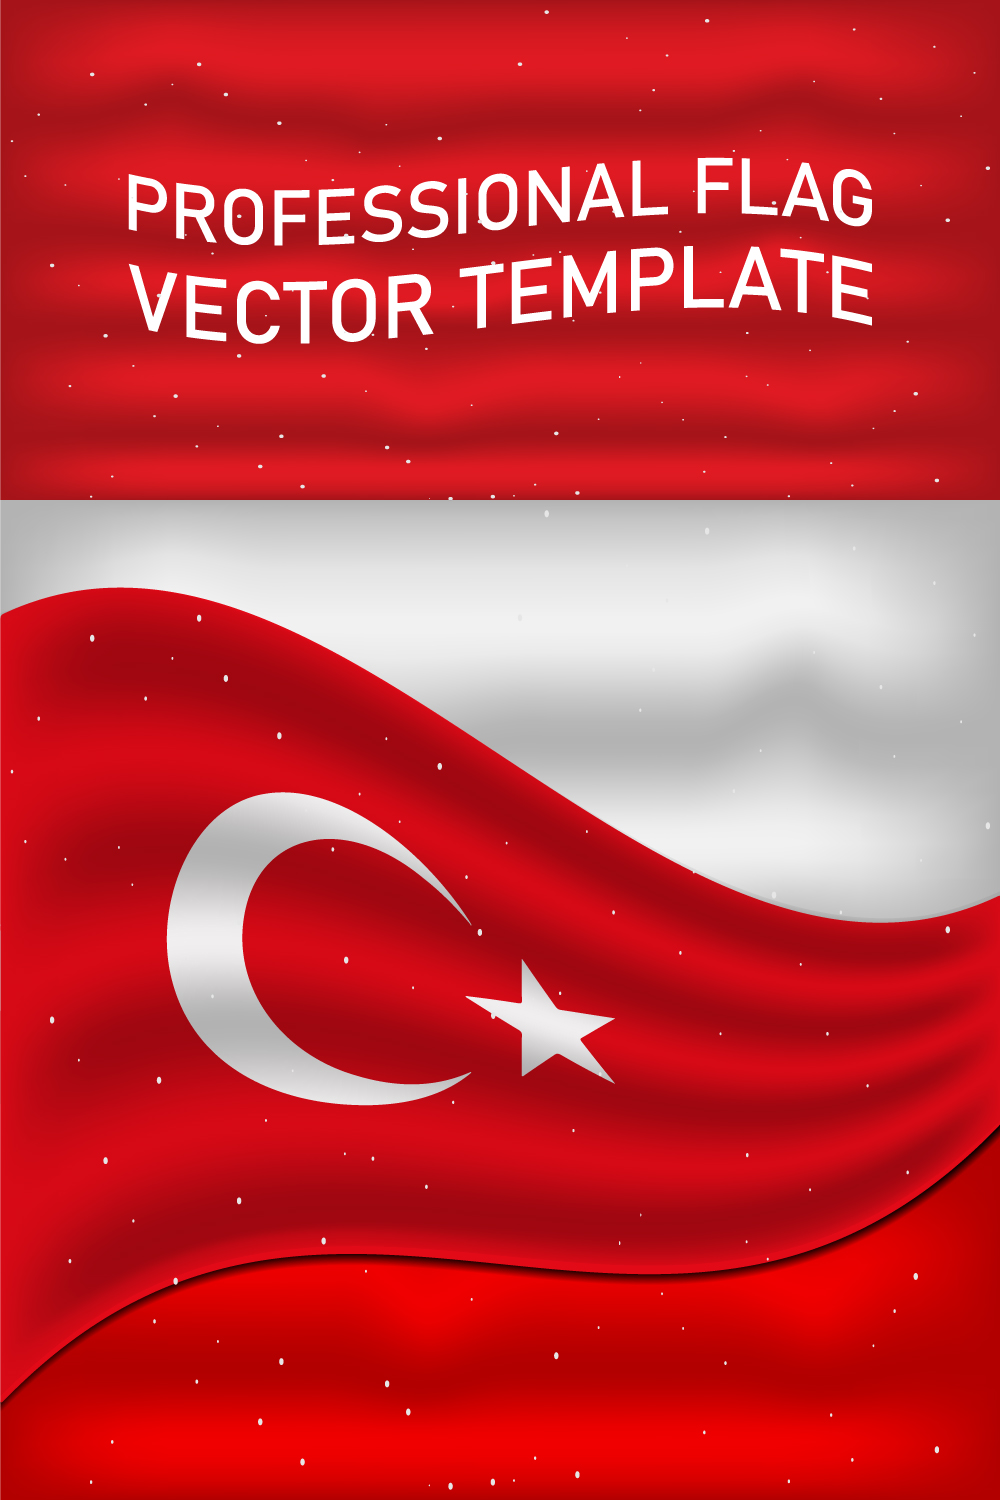 Exquisite image of the flag of Turkey.